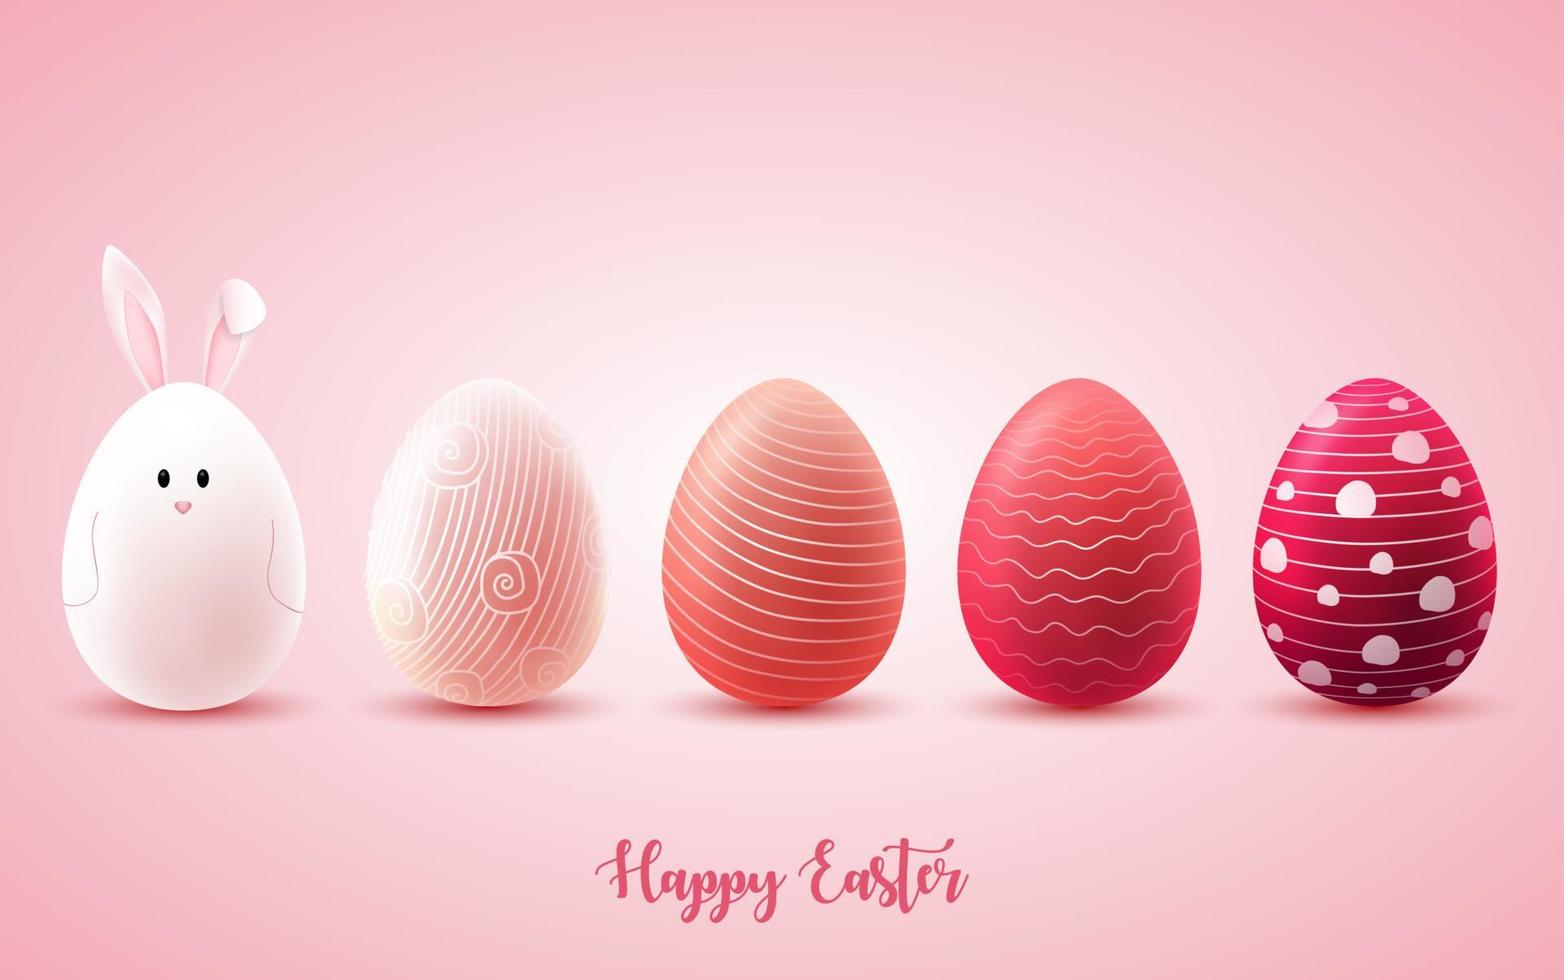 Funny Easter eggs on bright pink background vector